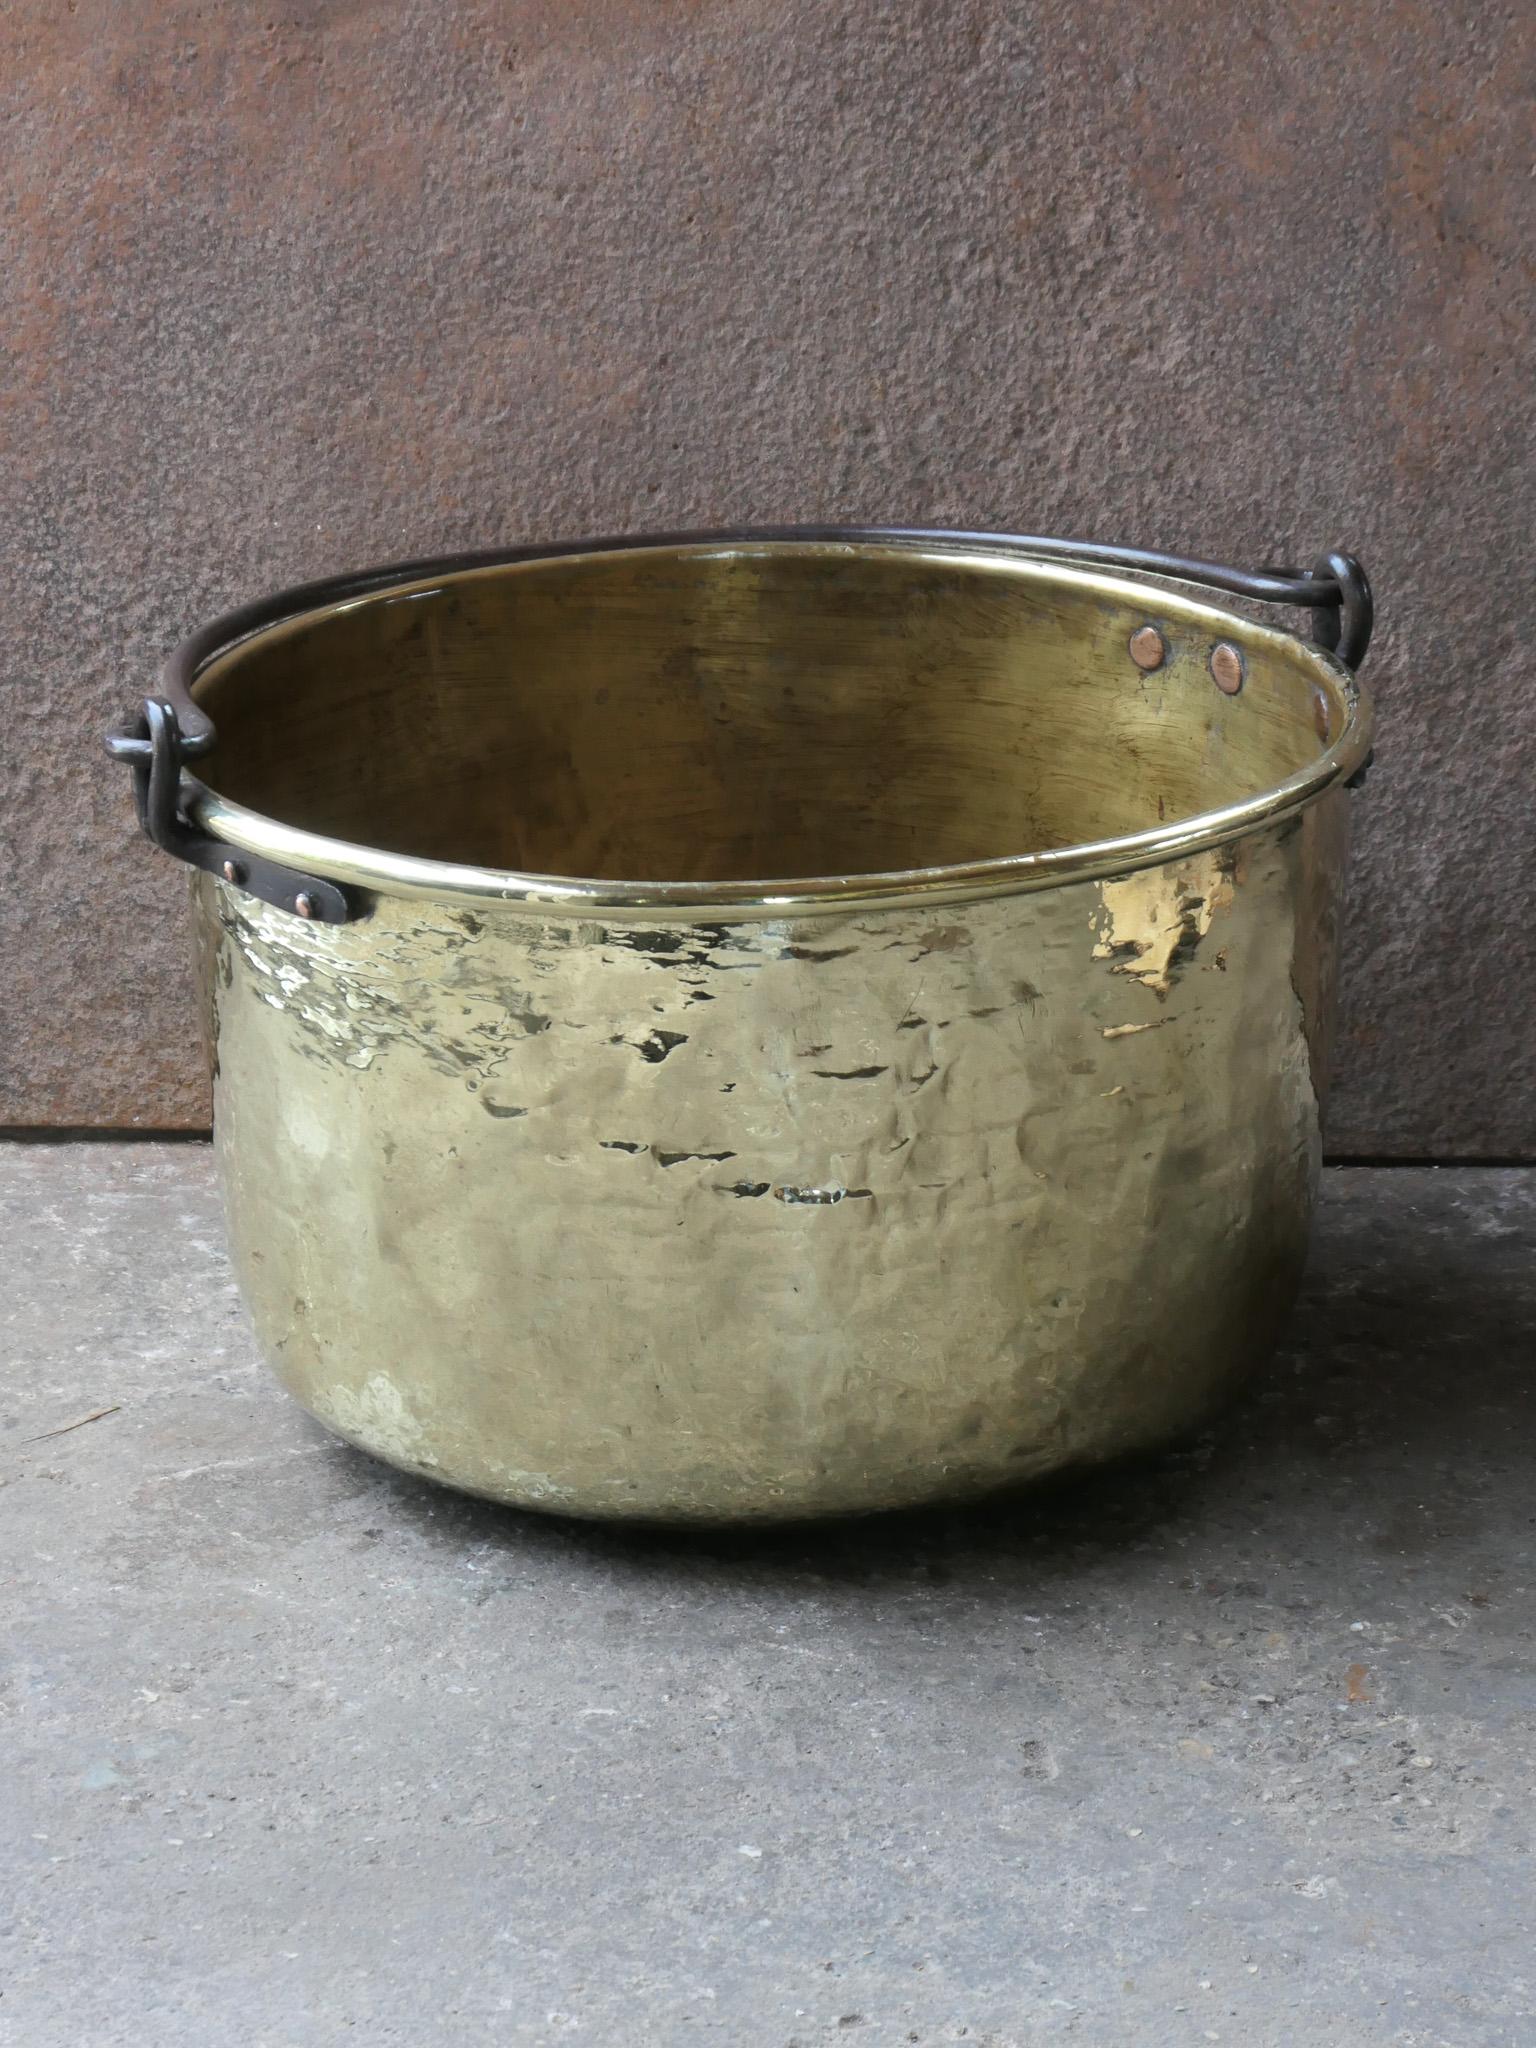 18th century Dutch log basket. The firewood basket is made of polished brass and has a wrought iron handle. Also called 'aker'. Used to draw water from the well and Cook over an open fire.

The log holder is in a good condition and is fully